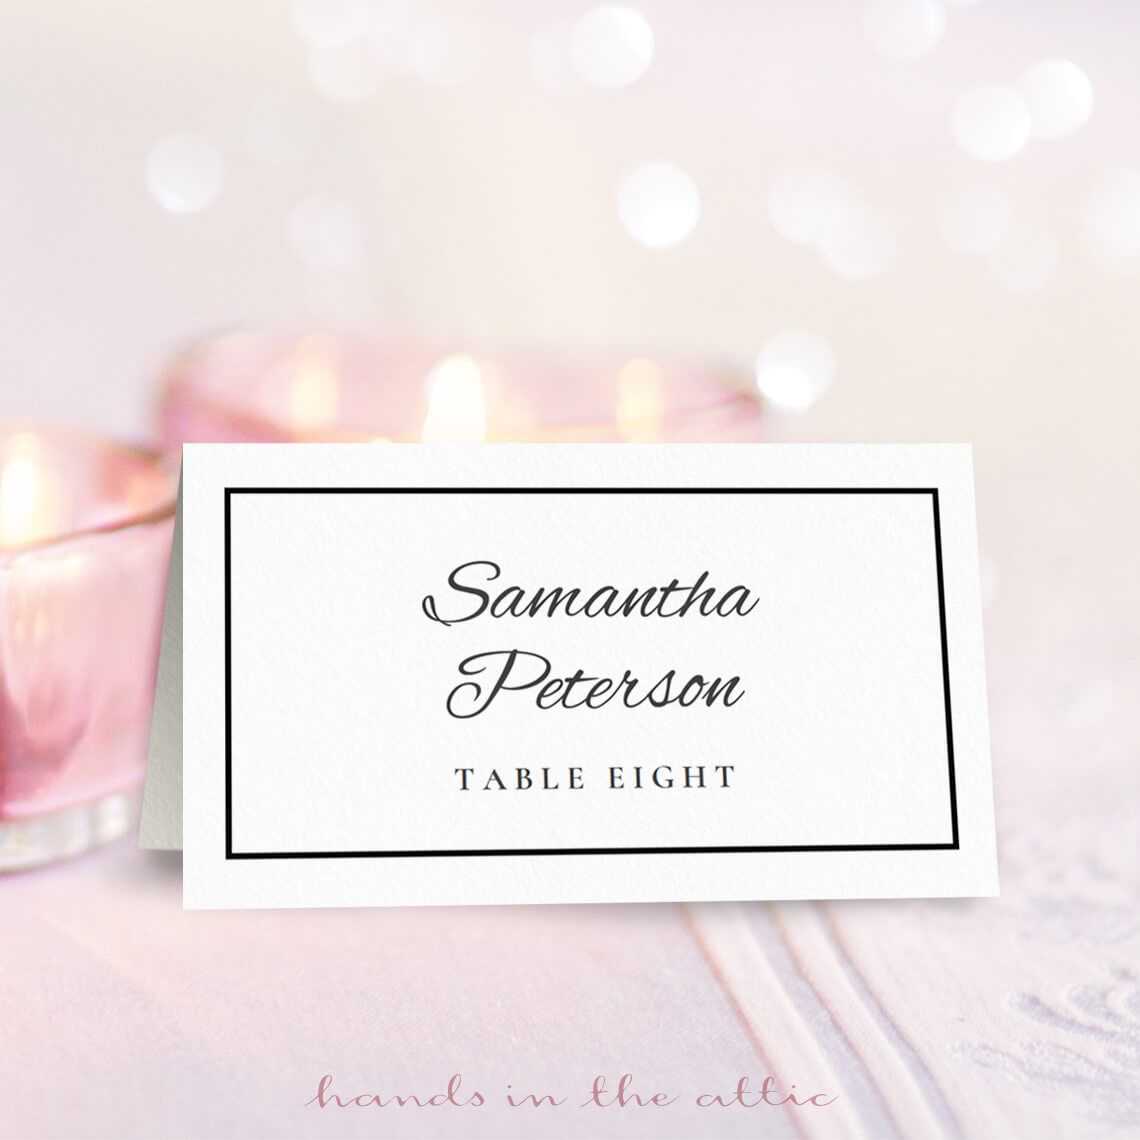 8 Free Wedding Place Card Templates Within Table Reservation Card Template